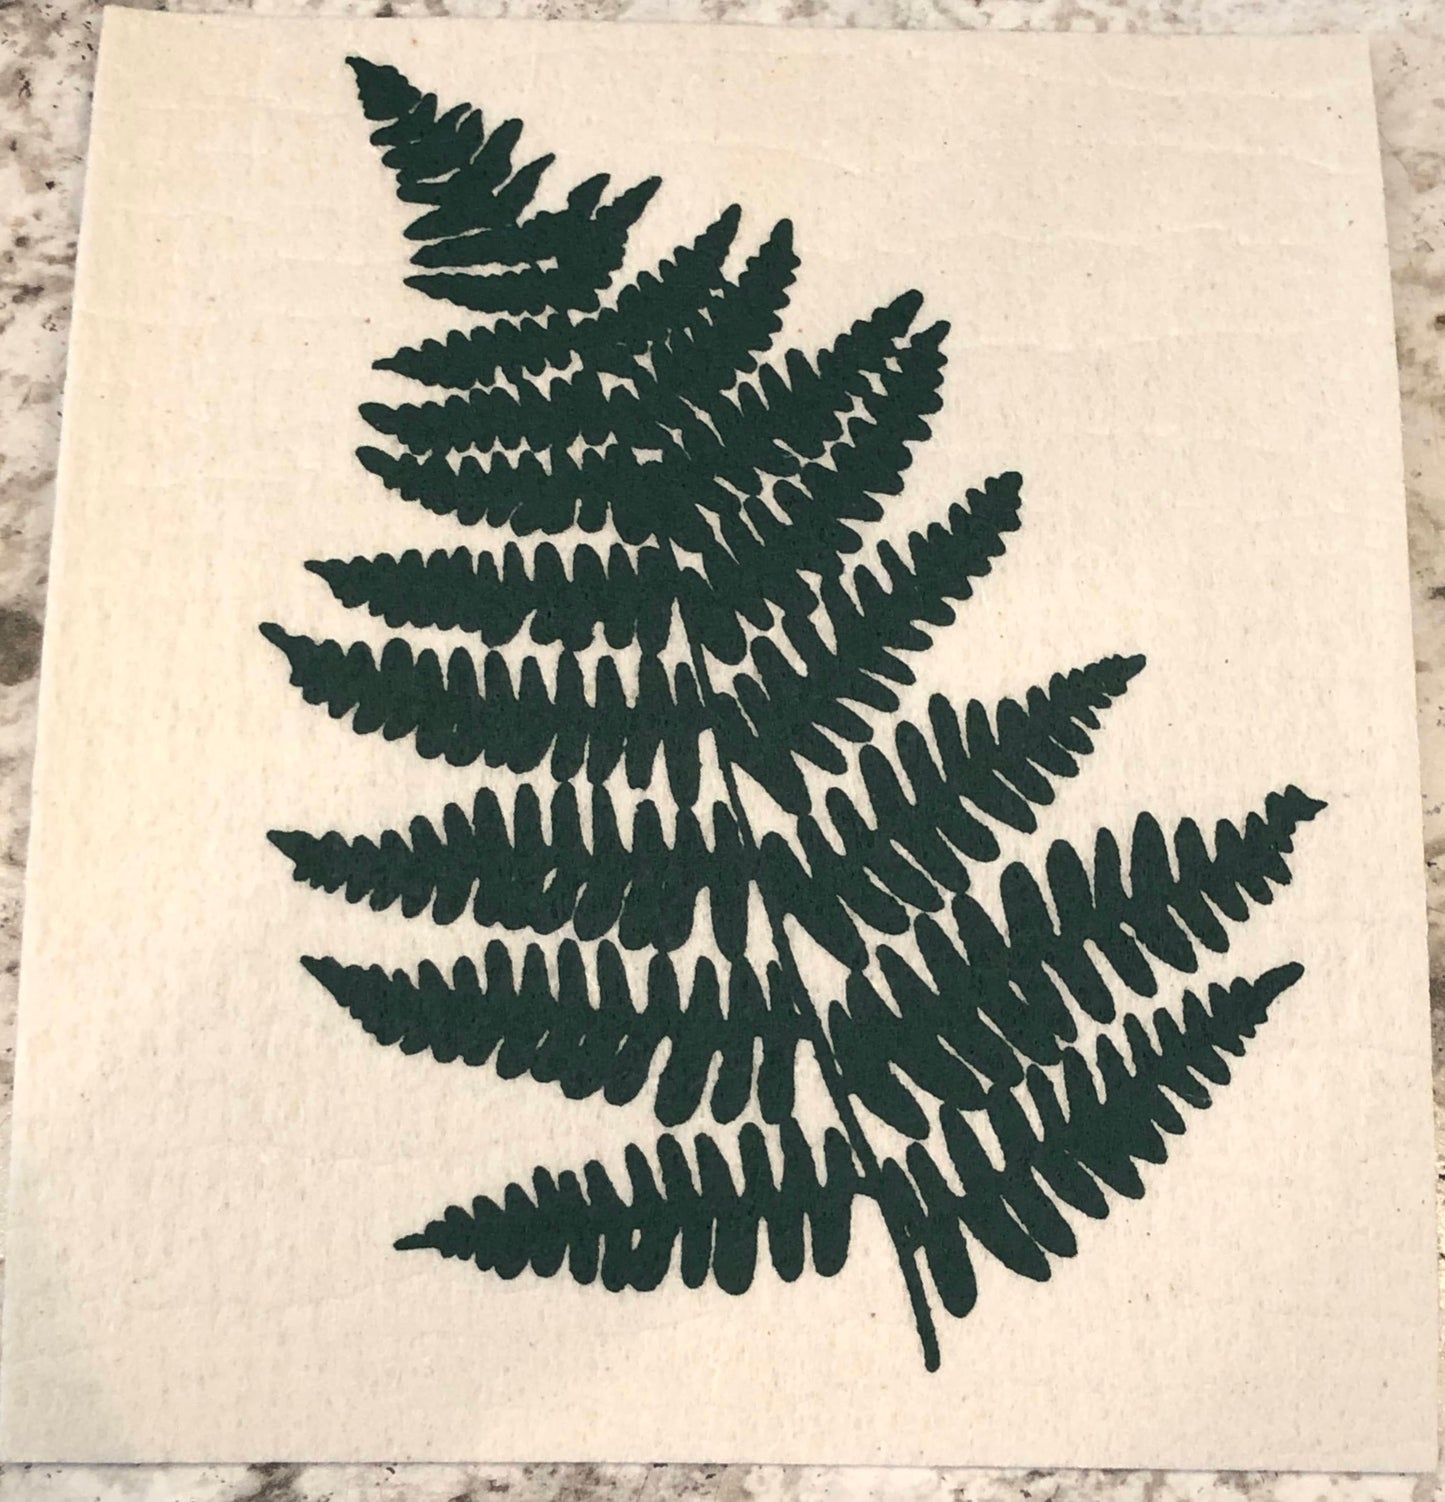 Swedish dish cloth. Paper towel replacement. No paper towel. Eco friendly gift idea. Hostess gift. Housewarming gift. Biodegradable.